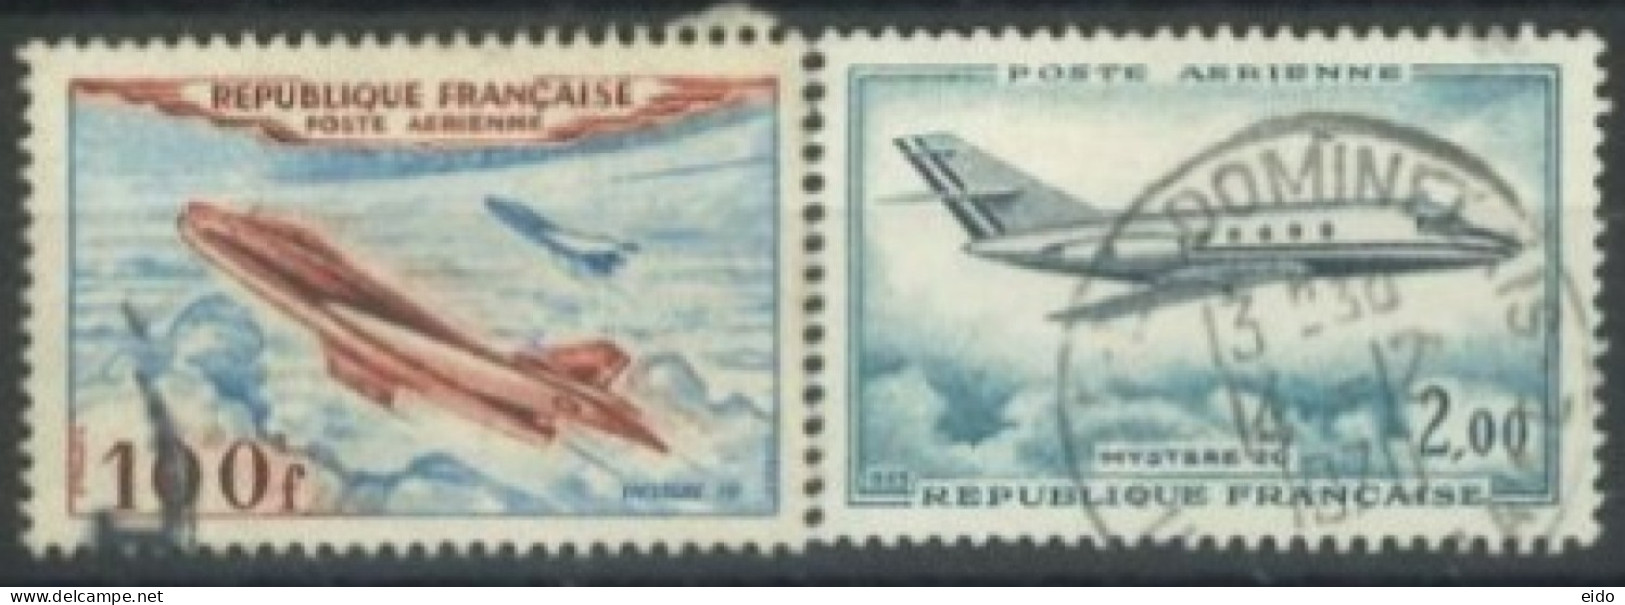 FRANCE - 1954/65 - AIR PLANES STAMPS SET OF 2, USED - Used Stamps